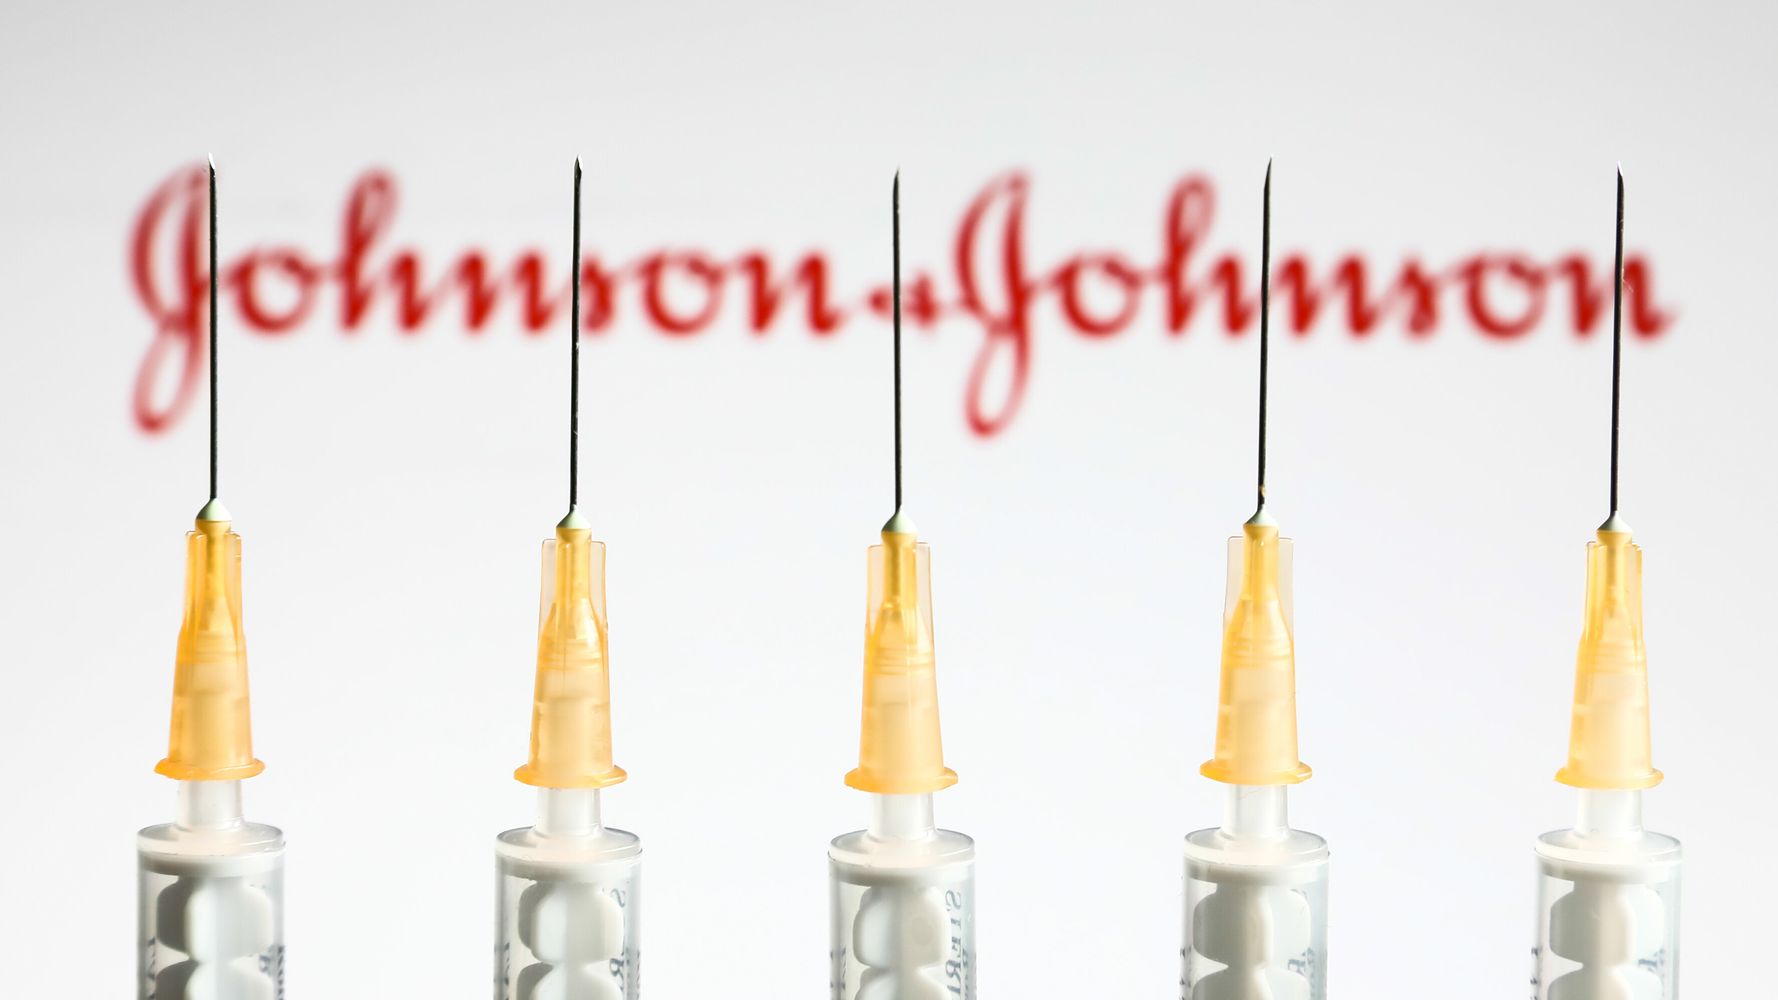 J&J Vaccine Gets Nod For Reapproval After Review Of ‘Extremely Rare’ Blood Clots